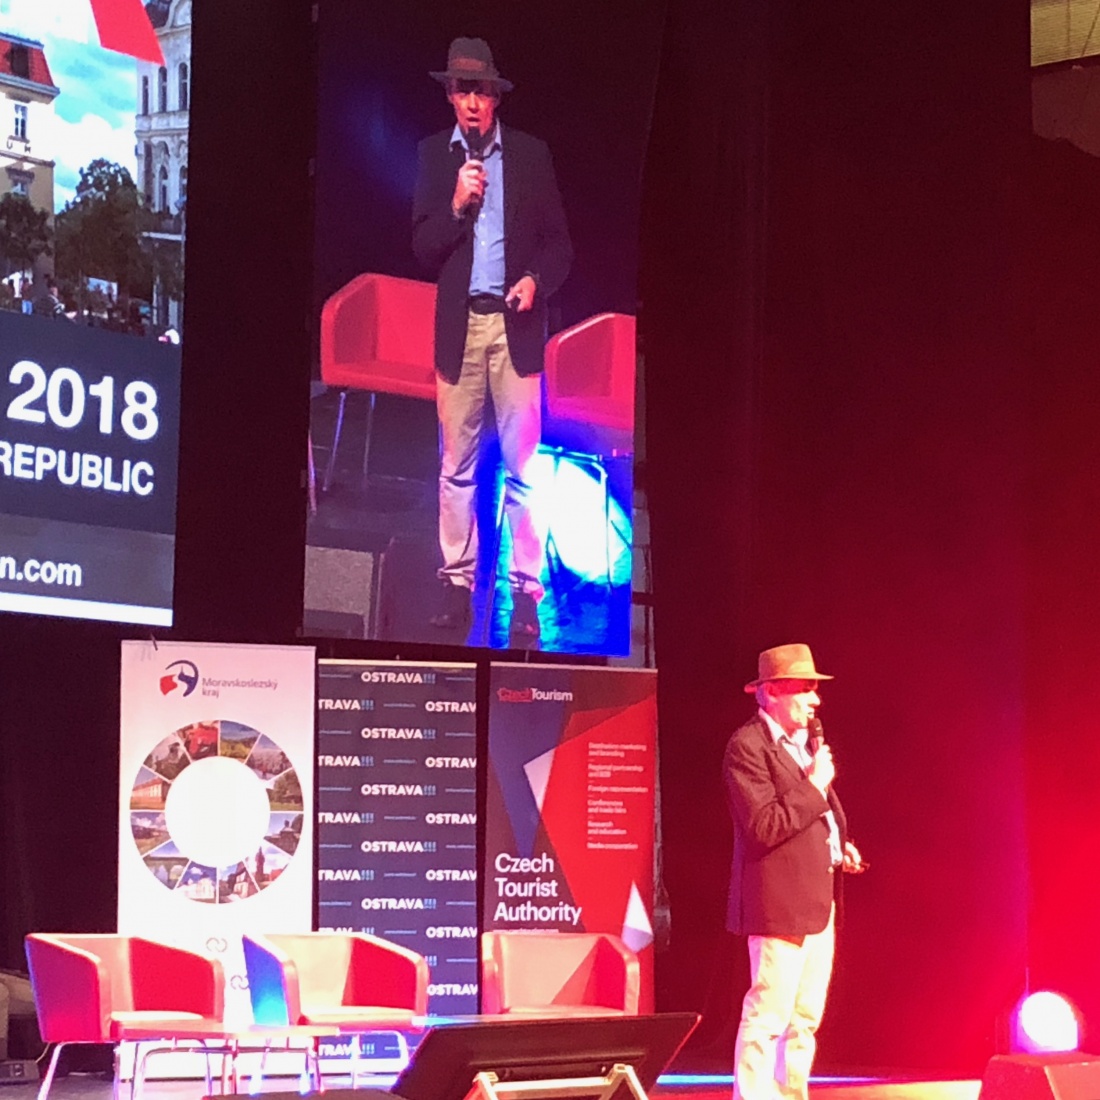 Conference organizer Shane Dallas addresses the crowd on opening day at TBEX Europe 2018 presentation, in Ostrava, Czech Republic.